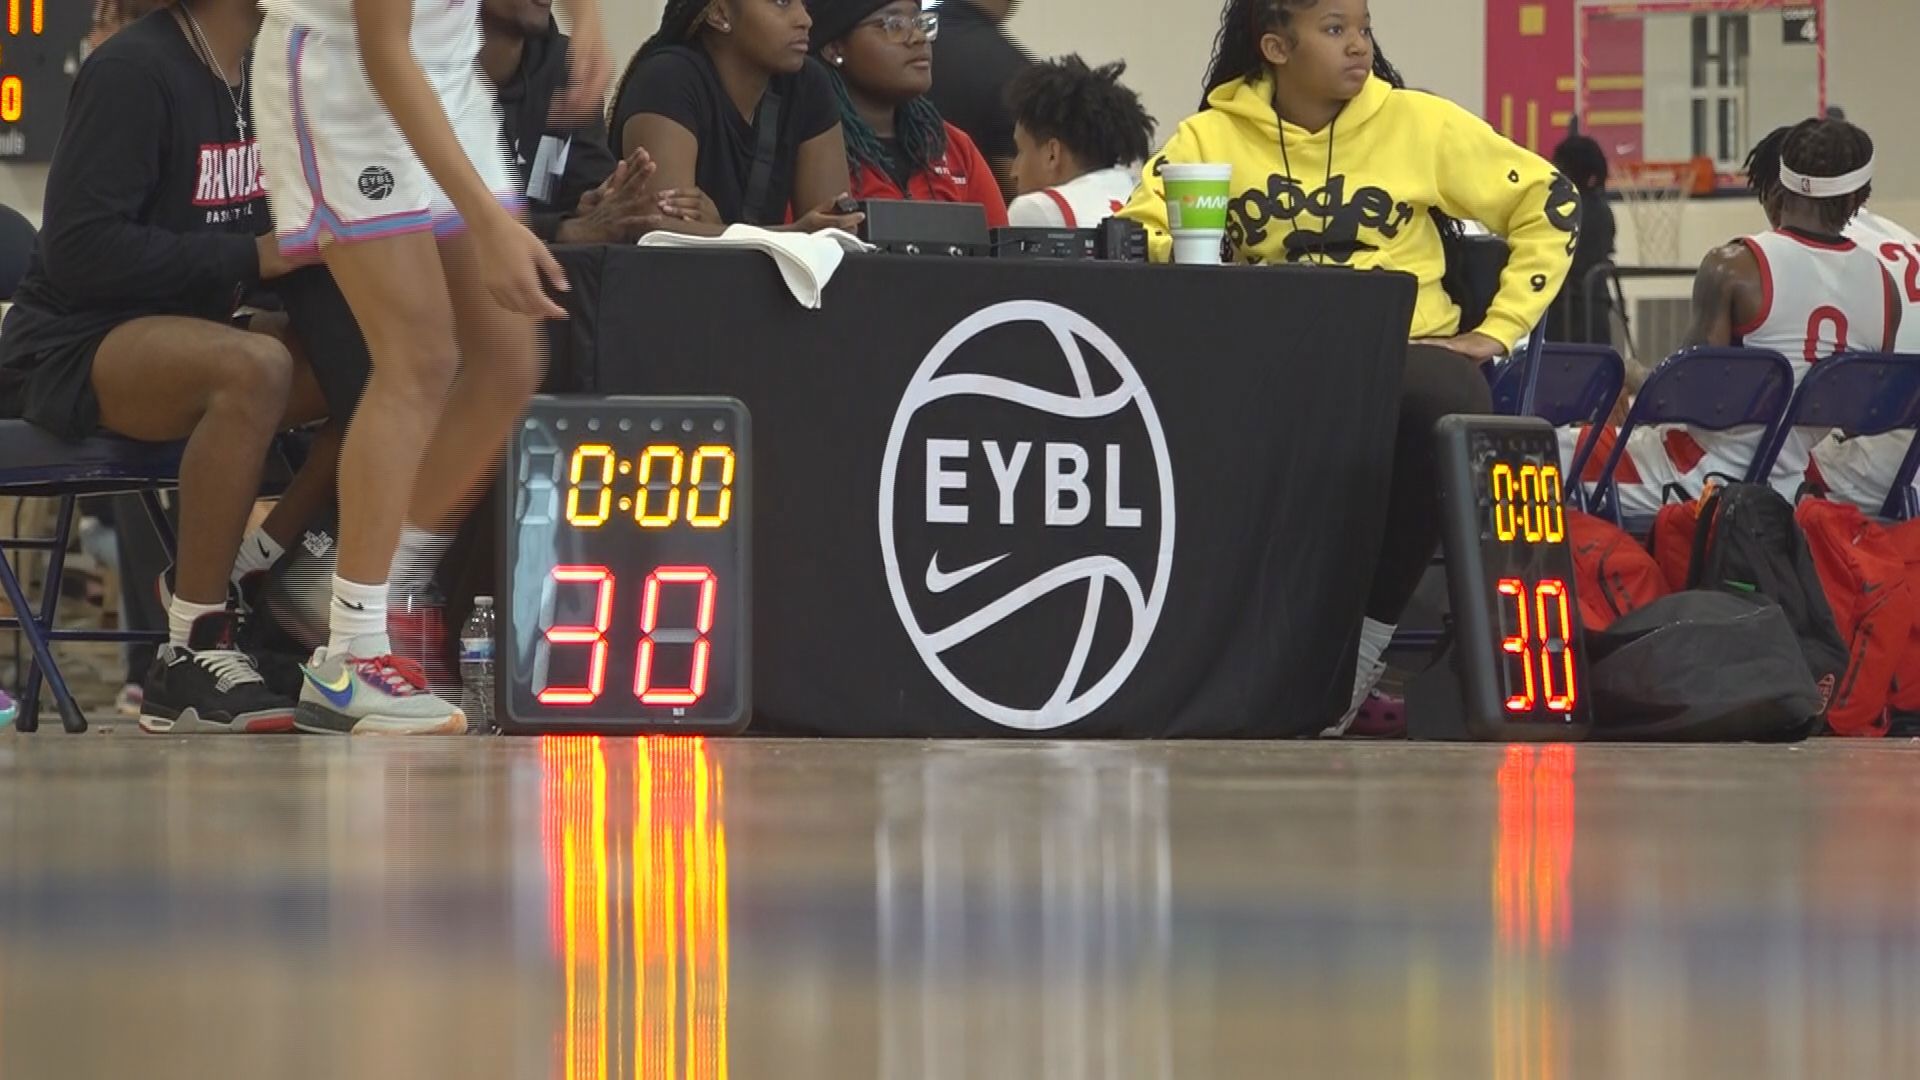 One of the most elite basketball tournaments in the country made a stop in Memphis as part of its journey to the Peach Jam.